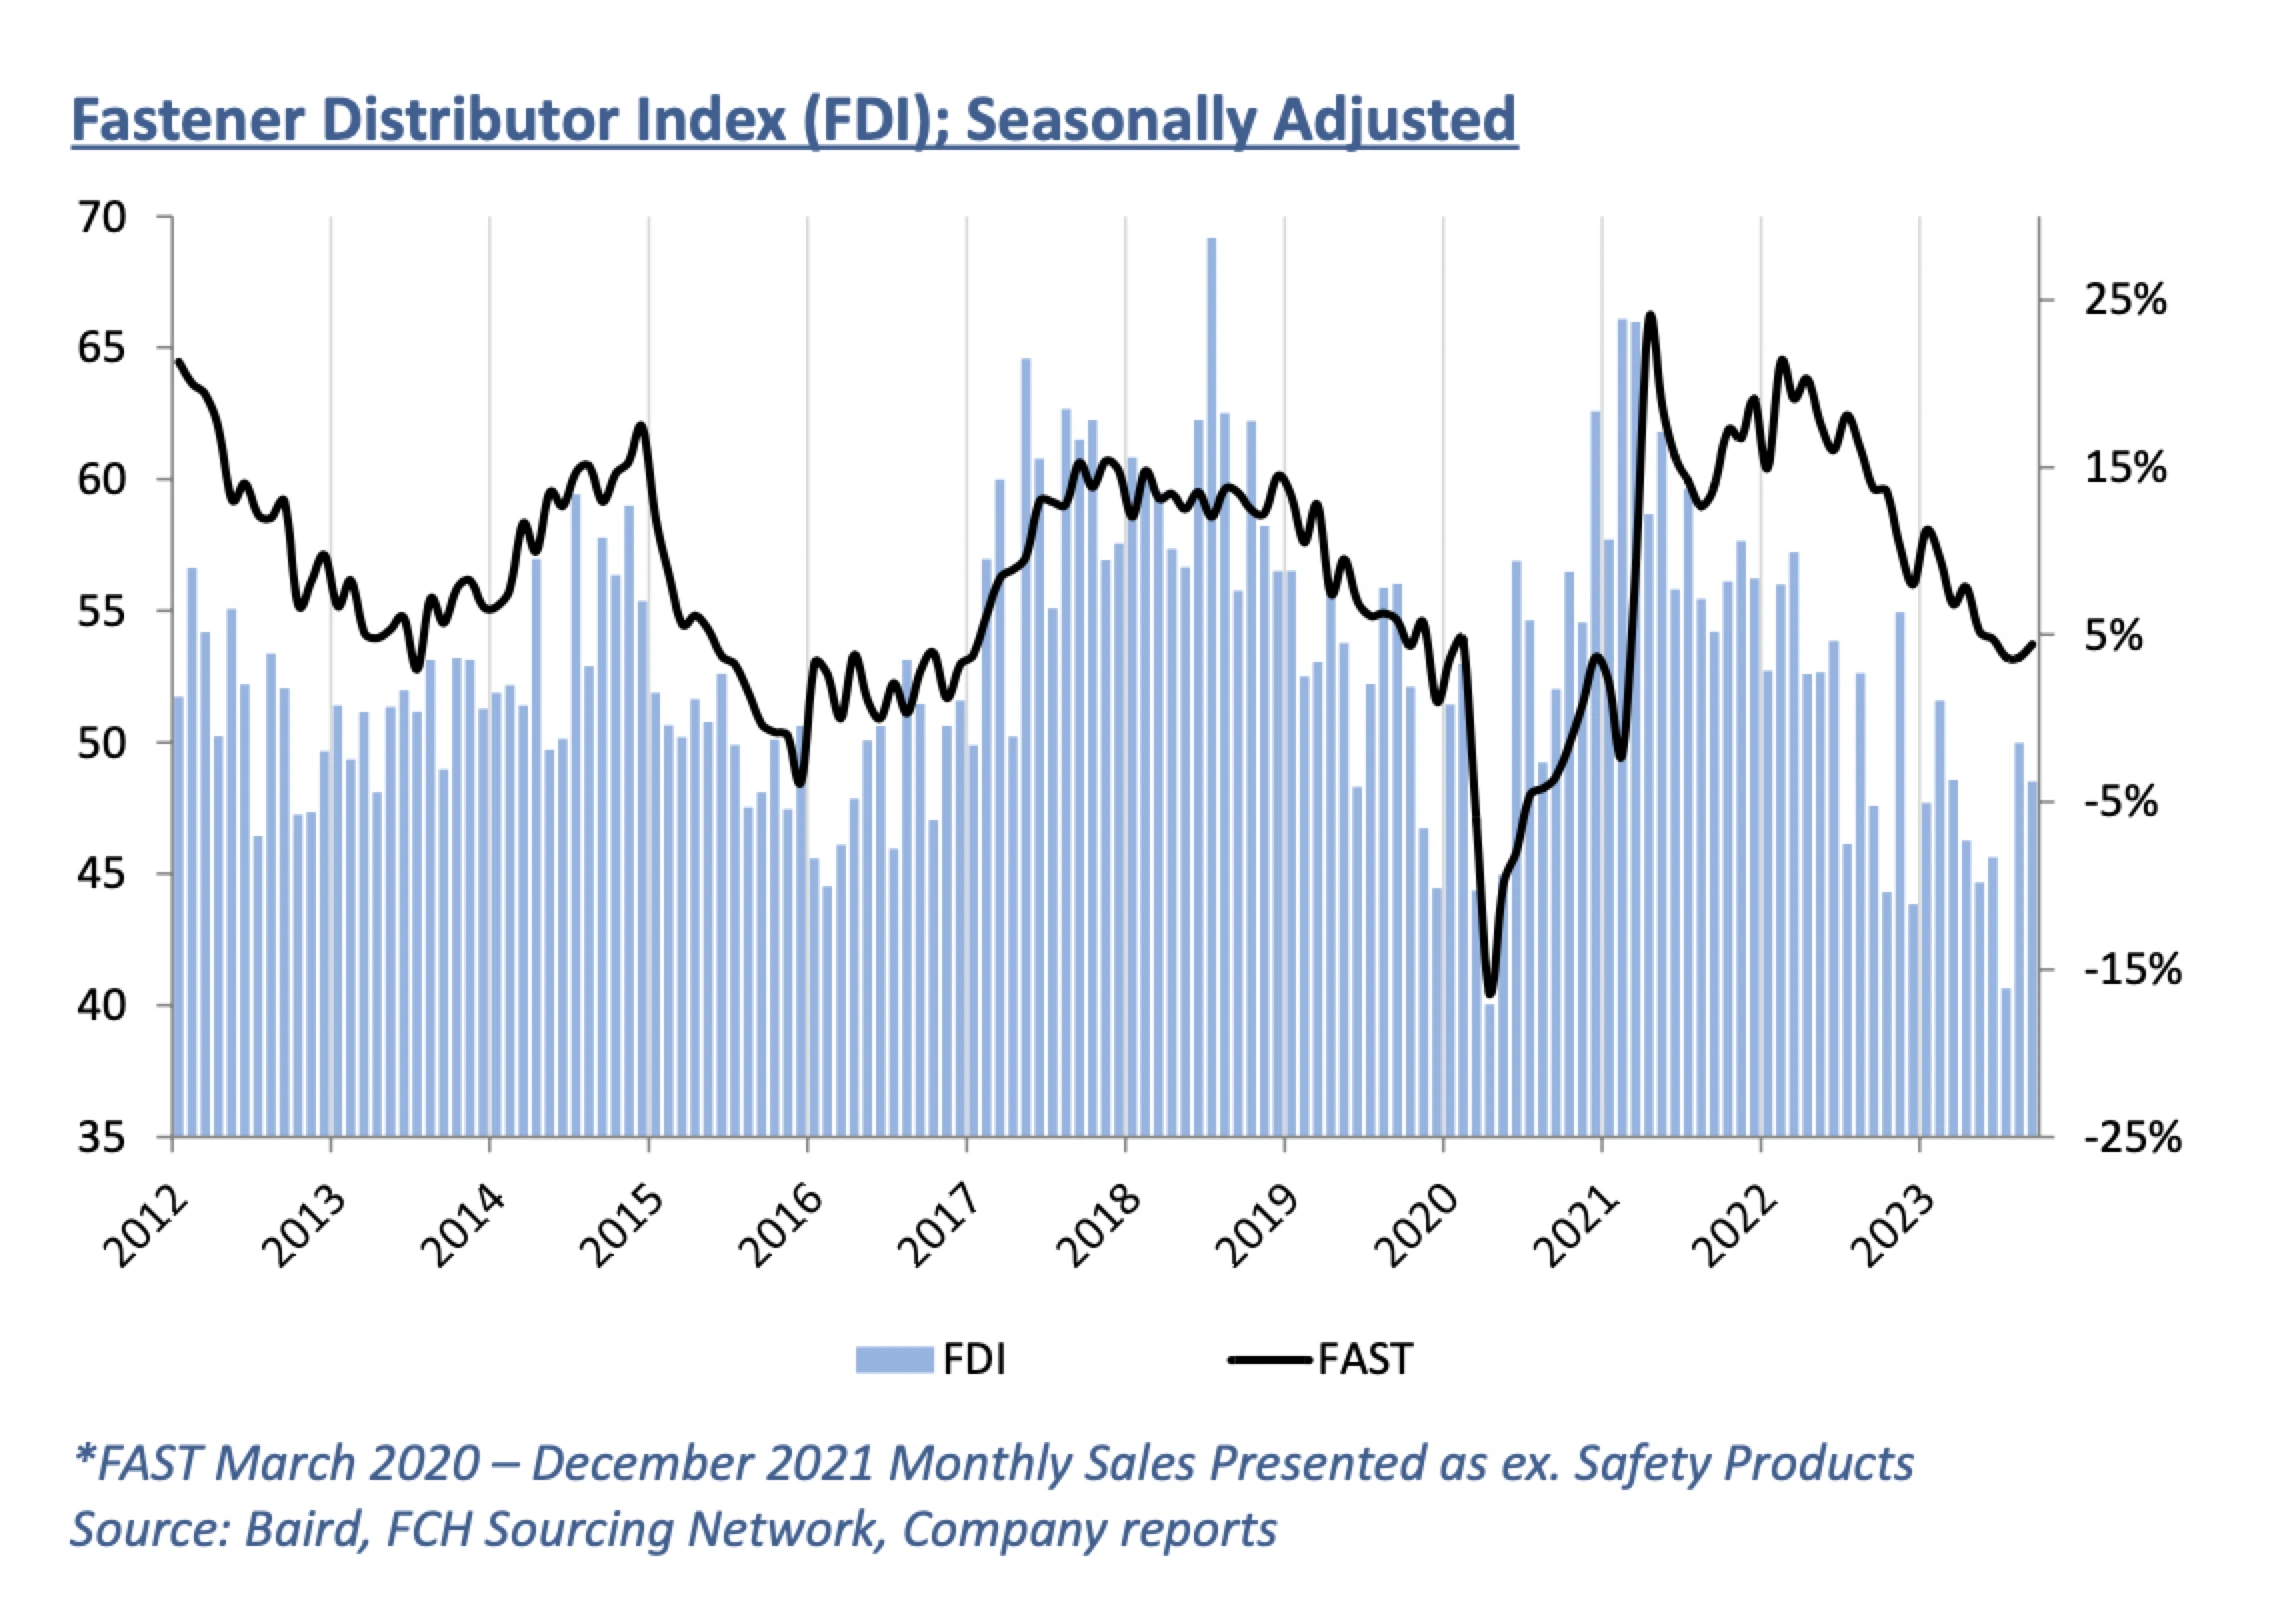 The seasonally adjusted Fastener Distributor Index (FDI) modestly retreated in September to a sub-50 reading at 48.5 after briefly reaching a neutral 50.0 in August.